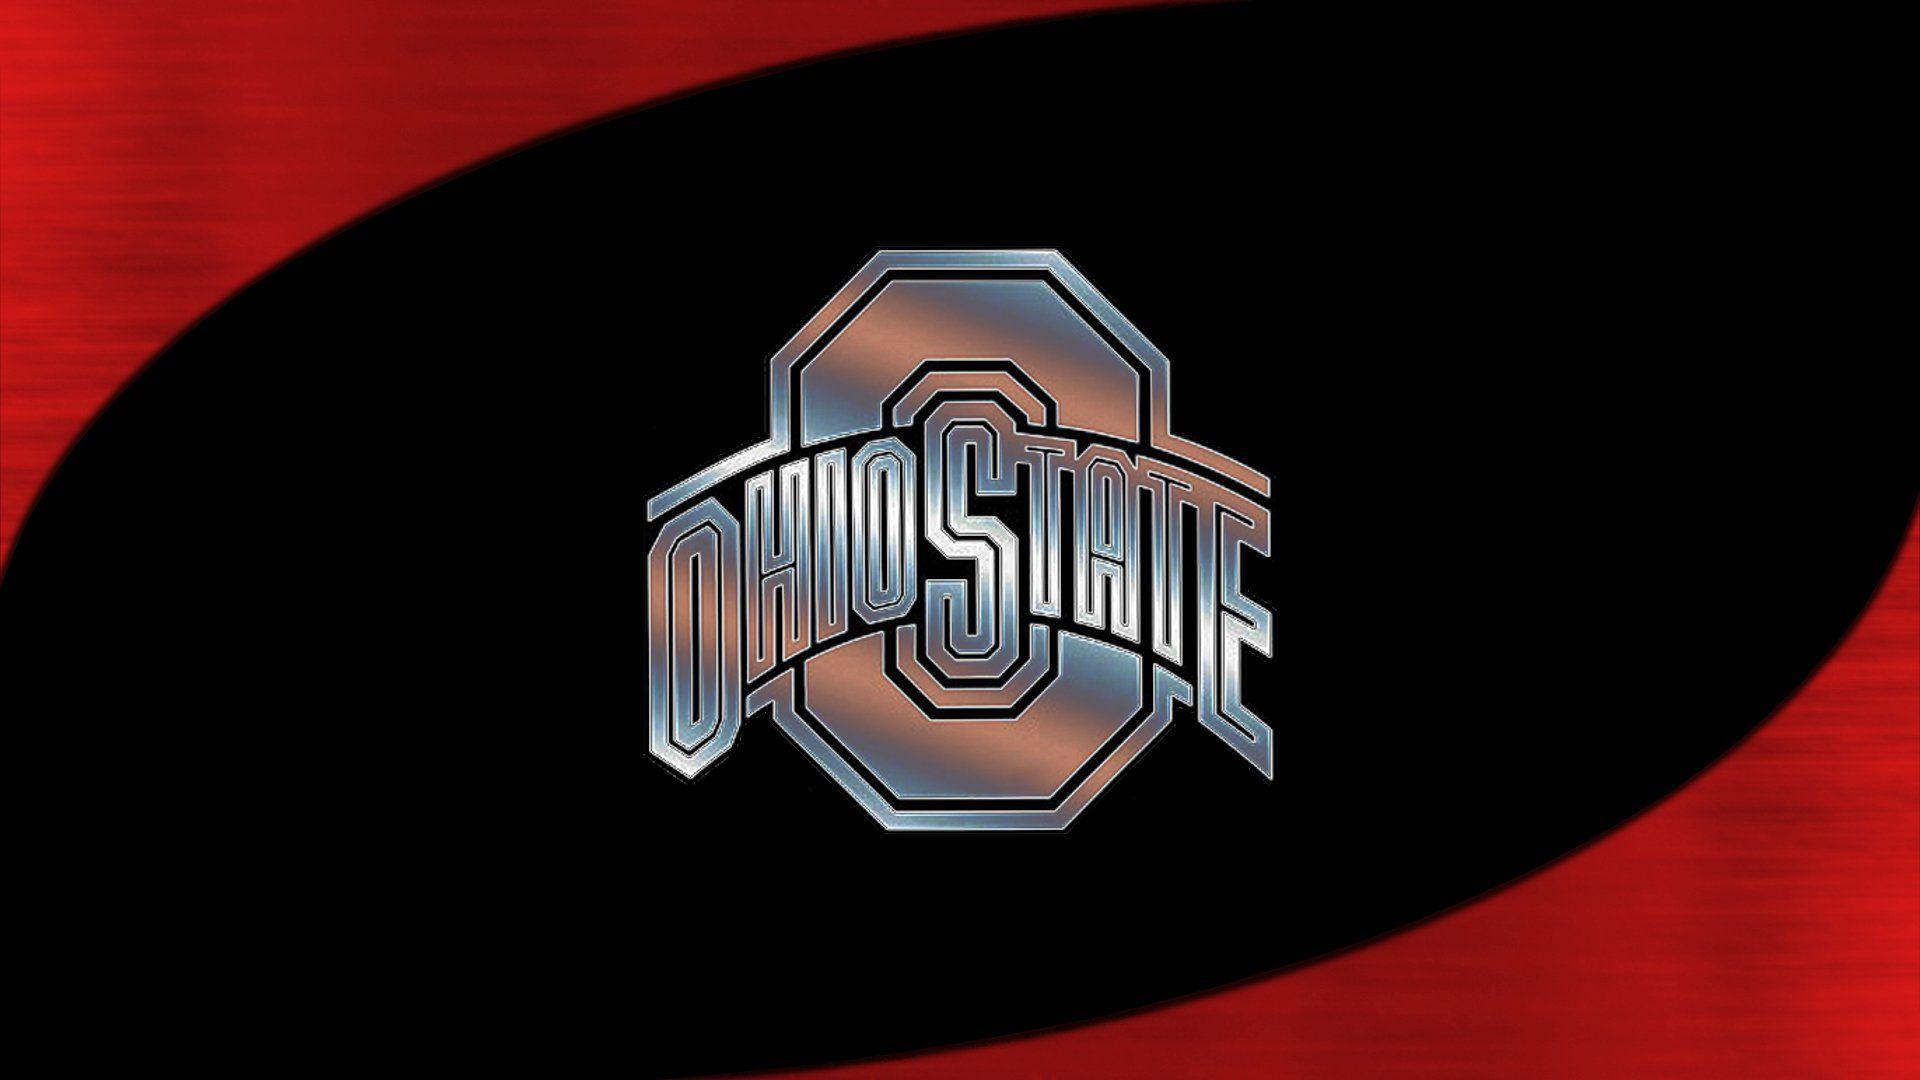 Ohio State Buckeyes Backgrounds Wallpaper Cave HD Wallpapers Download Free Images Wallpaper [wallpaper981.blogspot.com]